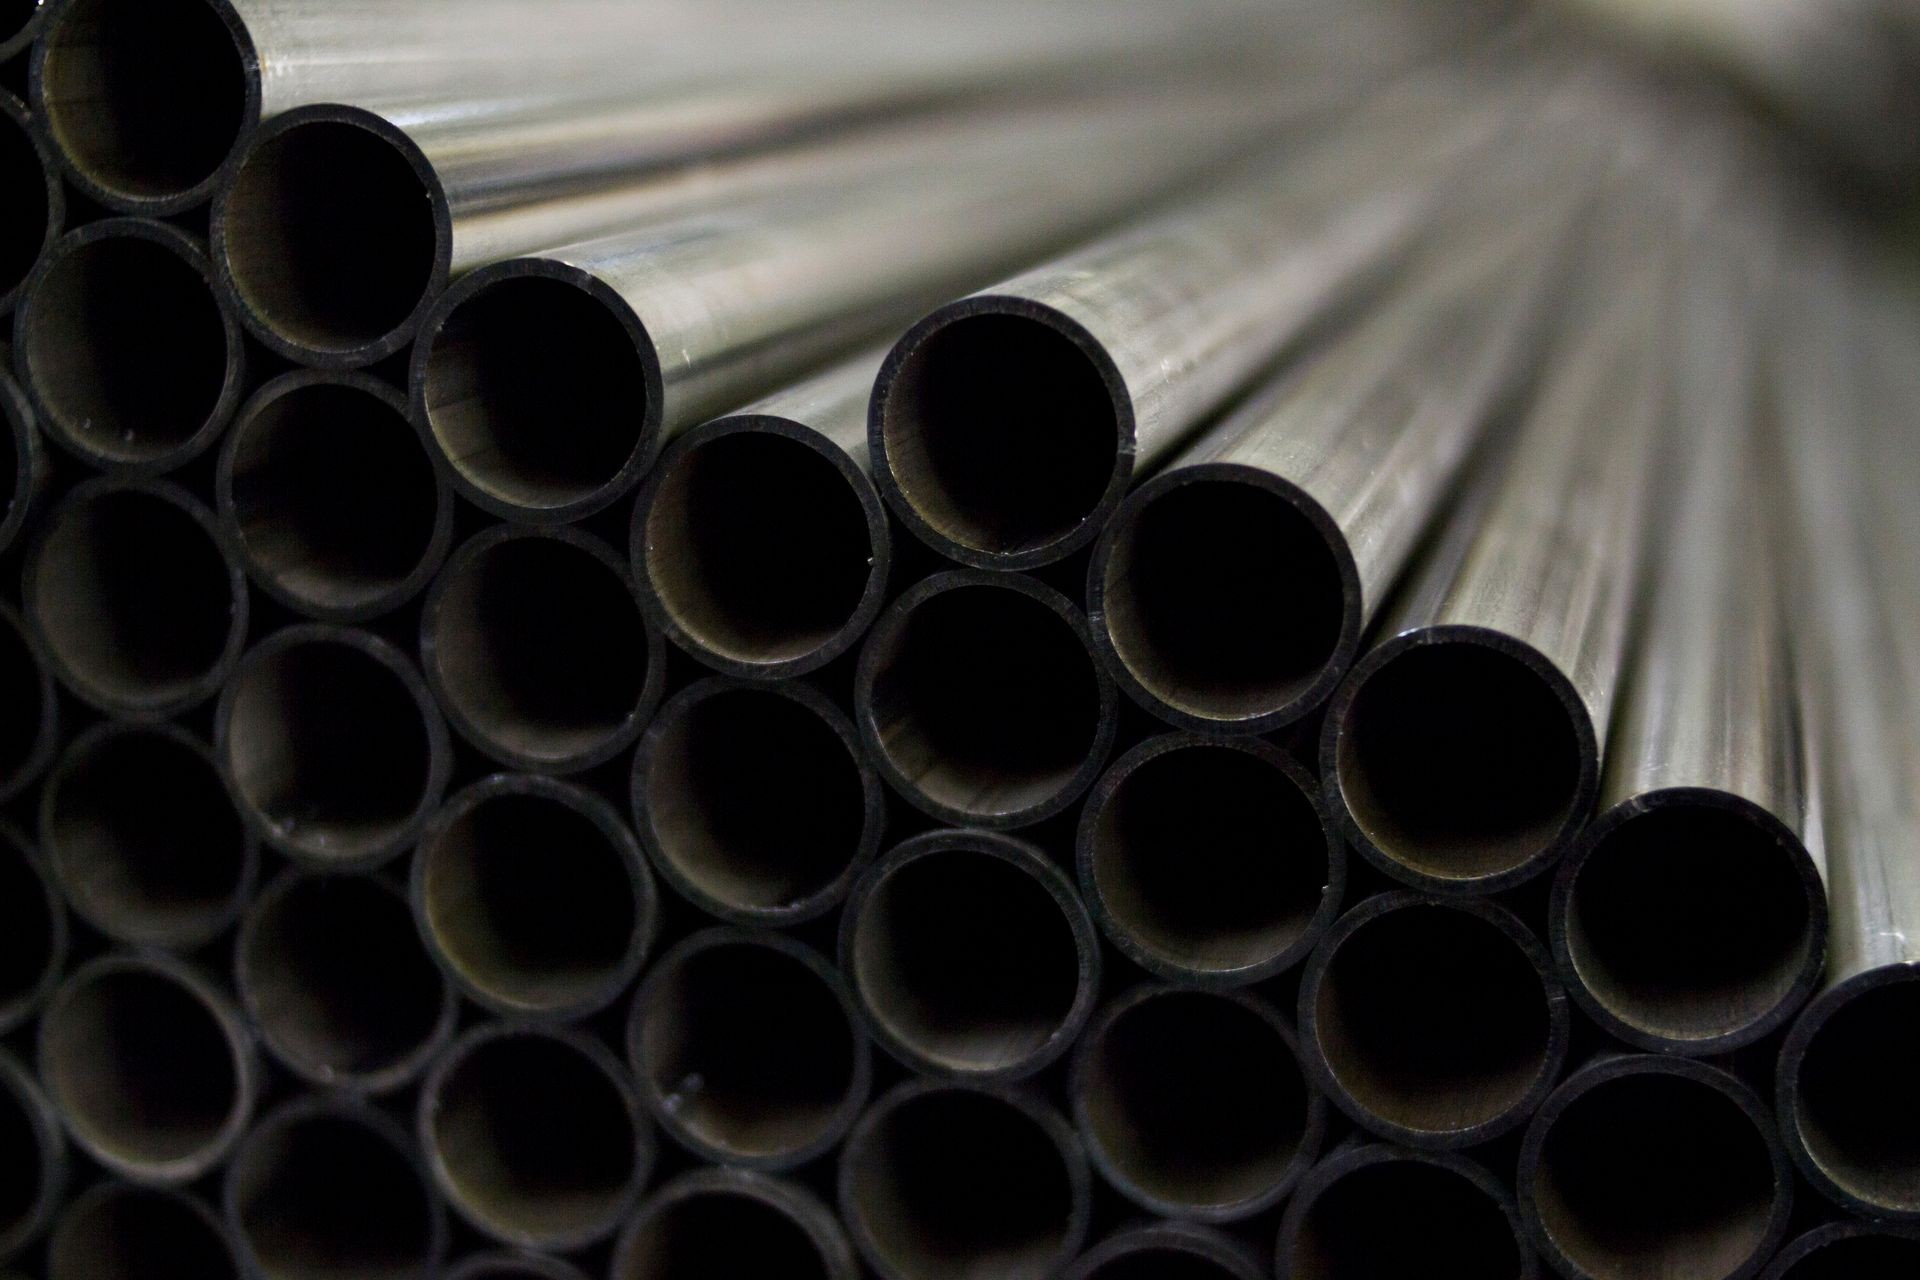 Lot of industrial metal steel pipes tubes for production for heating or engineering industry processing cutting welding and other work